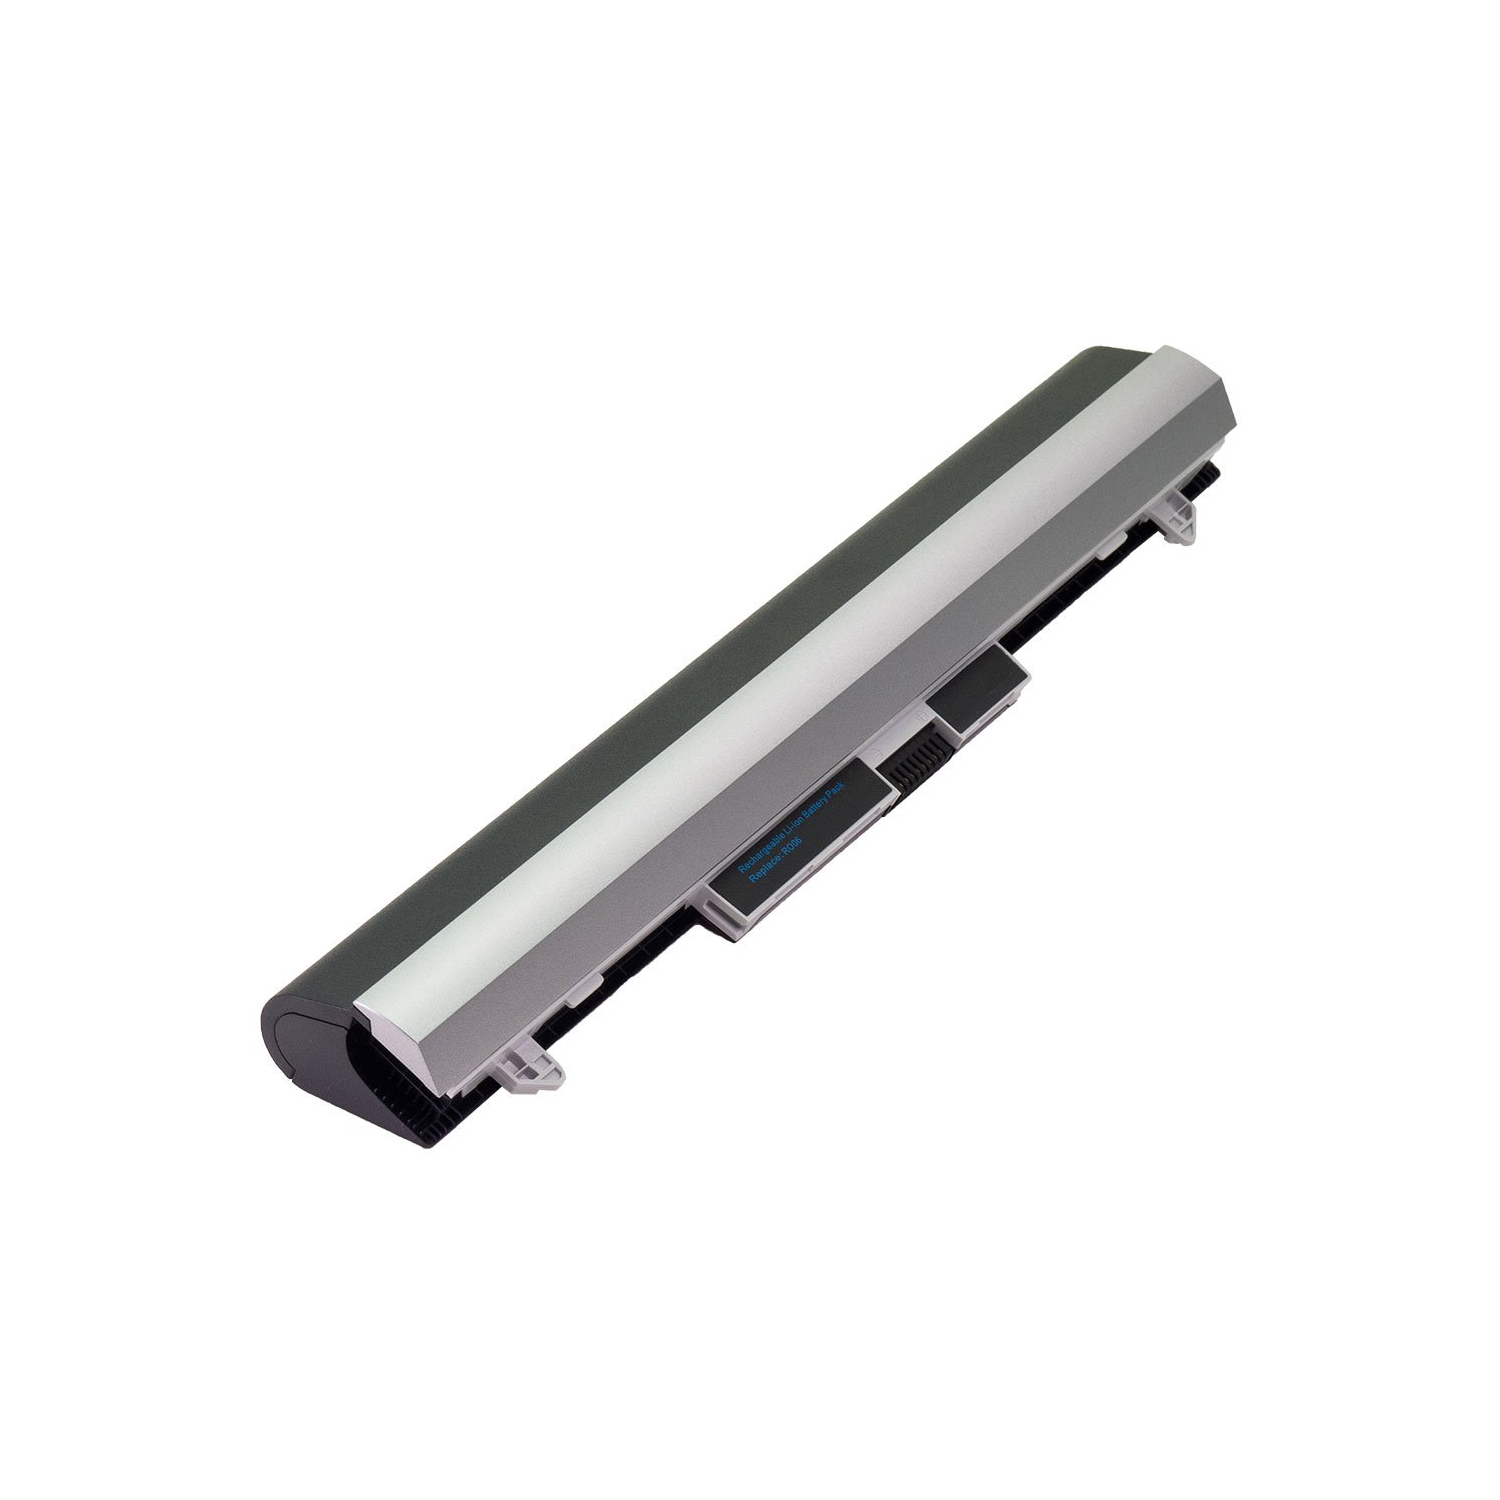 Laptop Battery Replacement for HP ProBook 440 G3, 805292-001, HSTNN-LB7A, HSTNN-PB6P, P3G13AA, P3G14AA, RO04, RO06XL